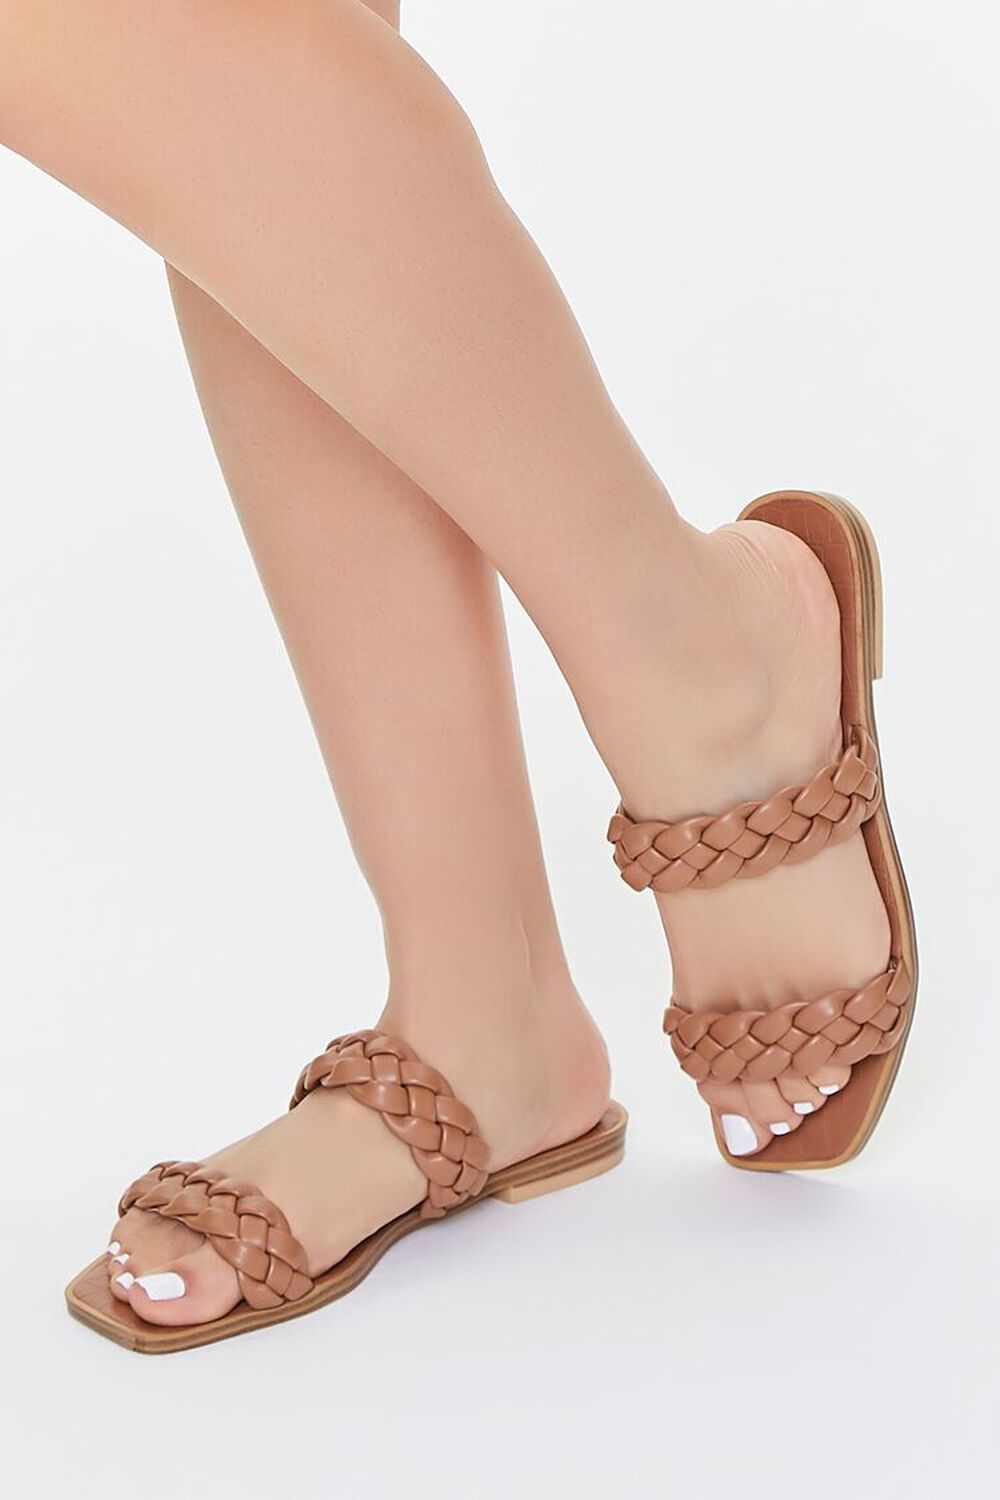 BROWN Braided Faux Leather Sandals, image 1